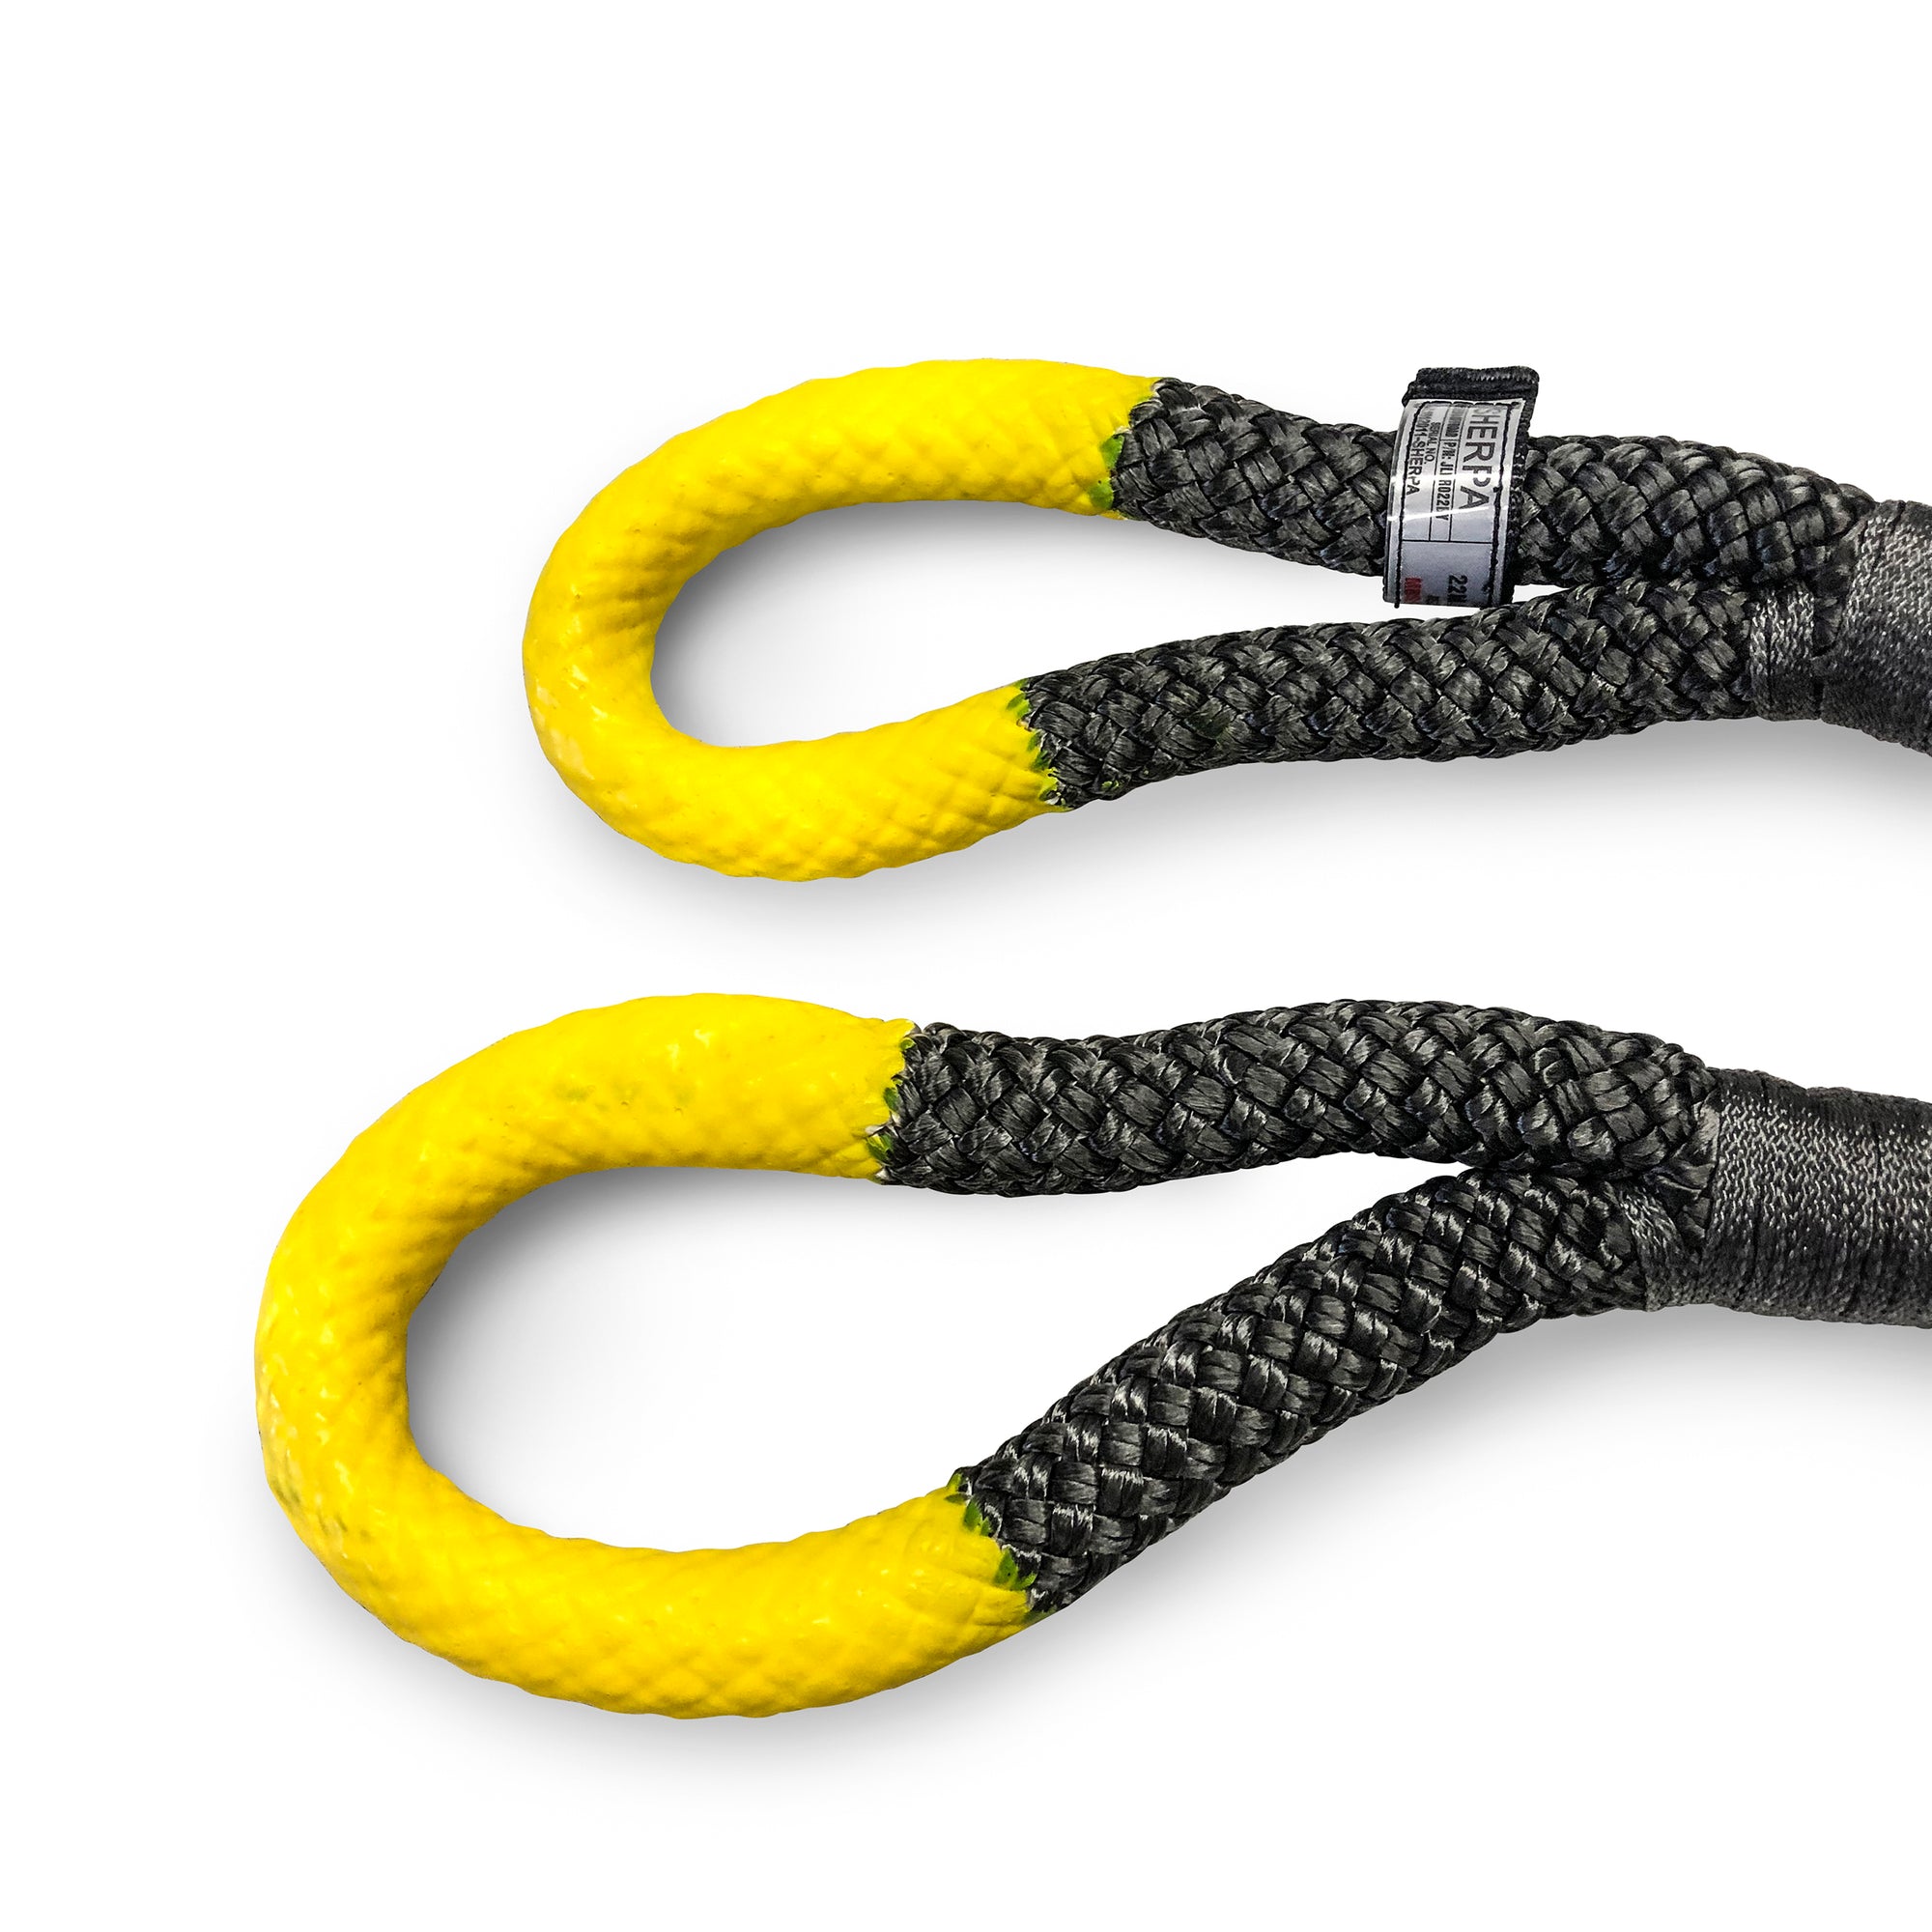 4wd kinetic recovery rope strap 4x4 sherpa bubba factor 55